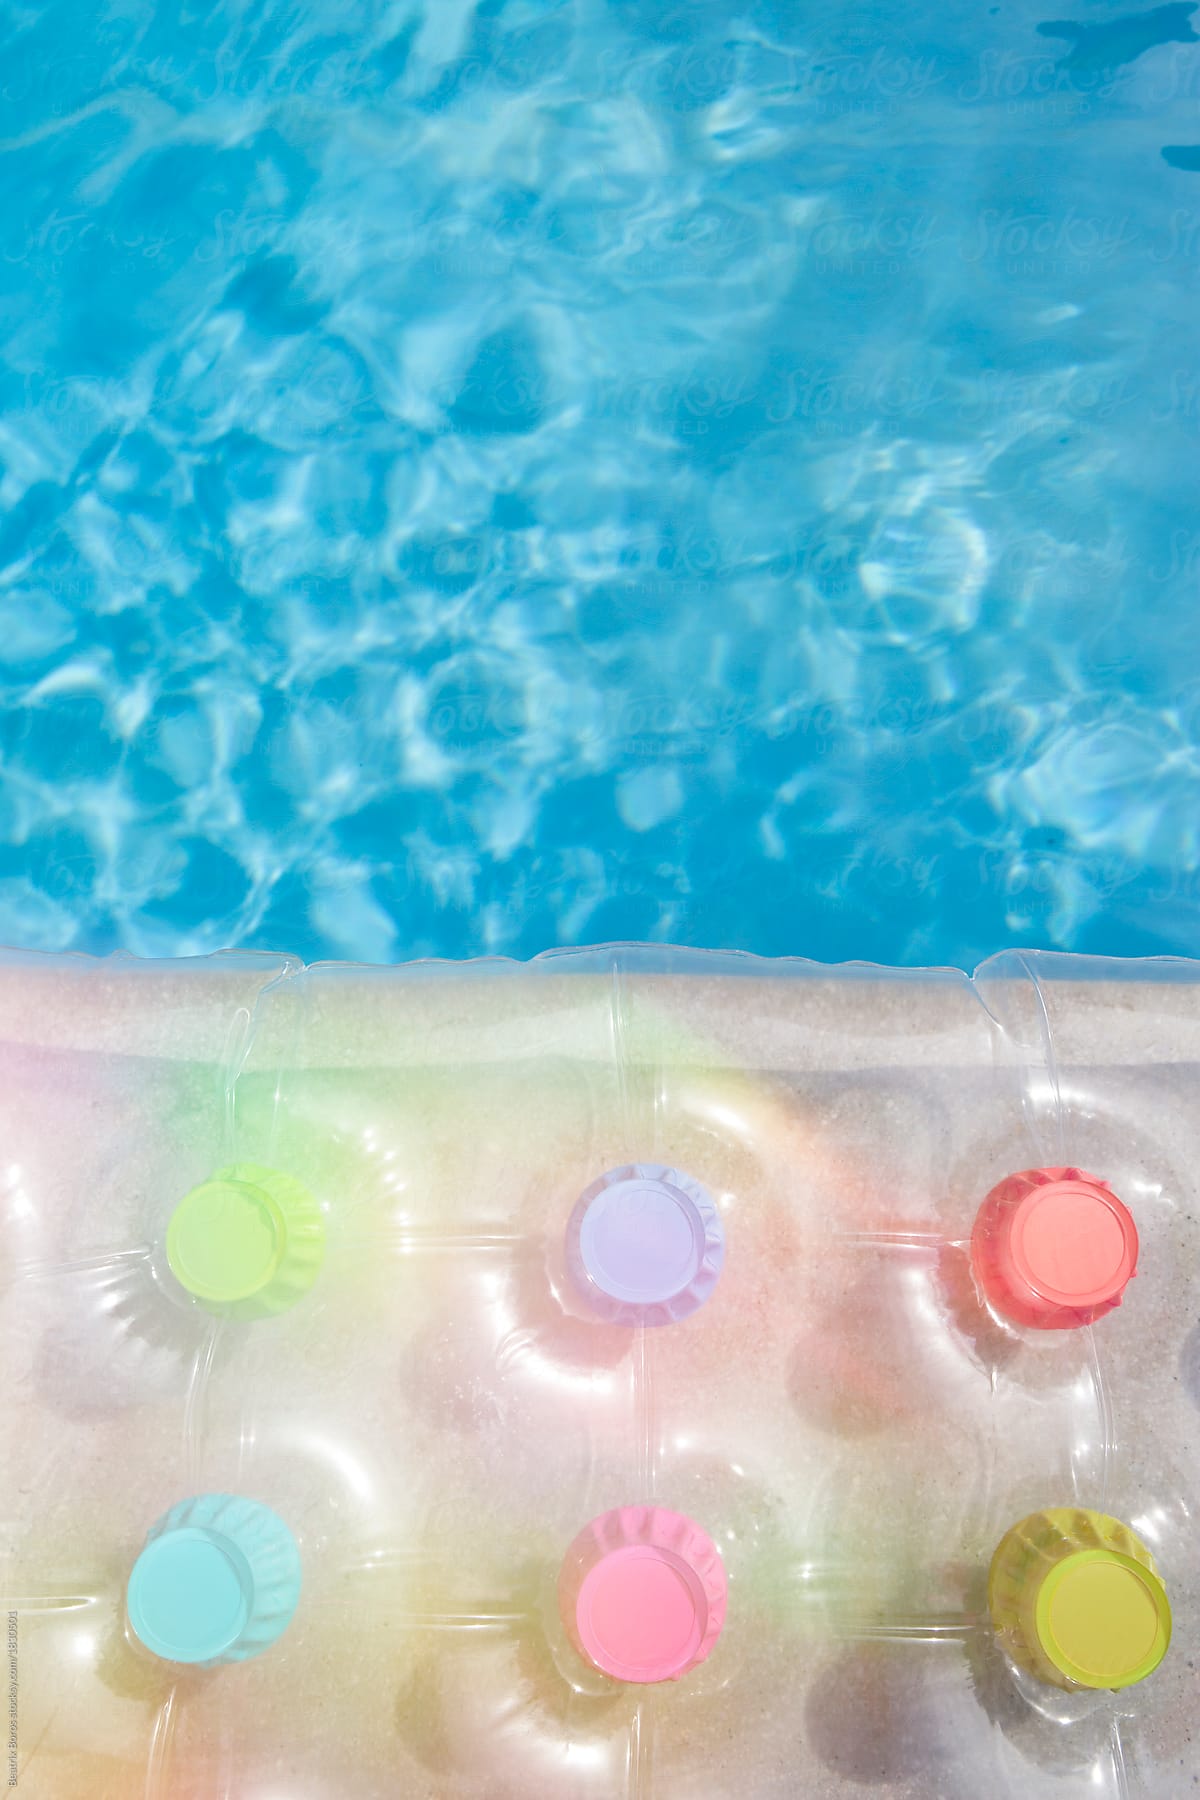 Details of a transparent air mattress on the water in Summer time